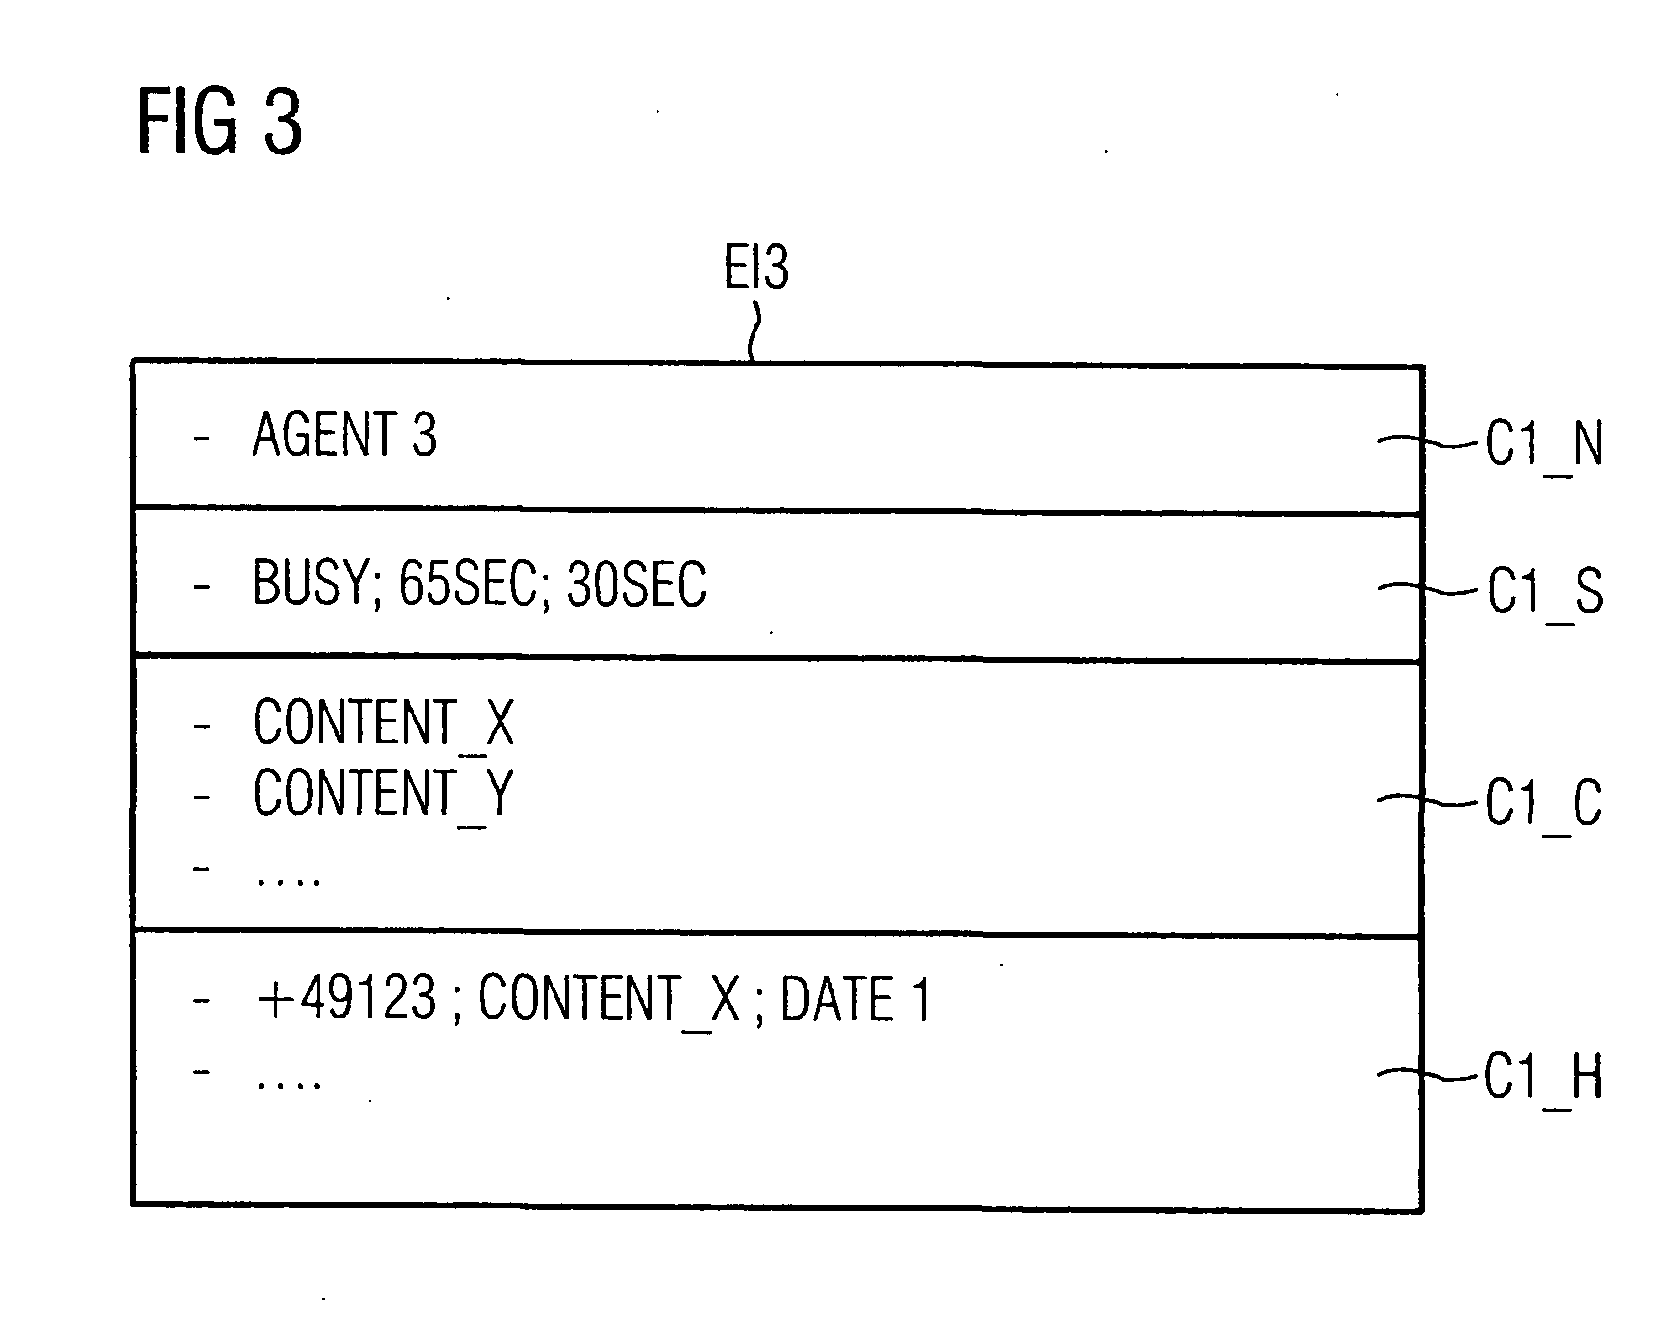 Call Distribution in a Direct-Communication Network